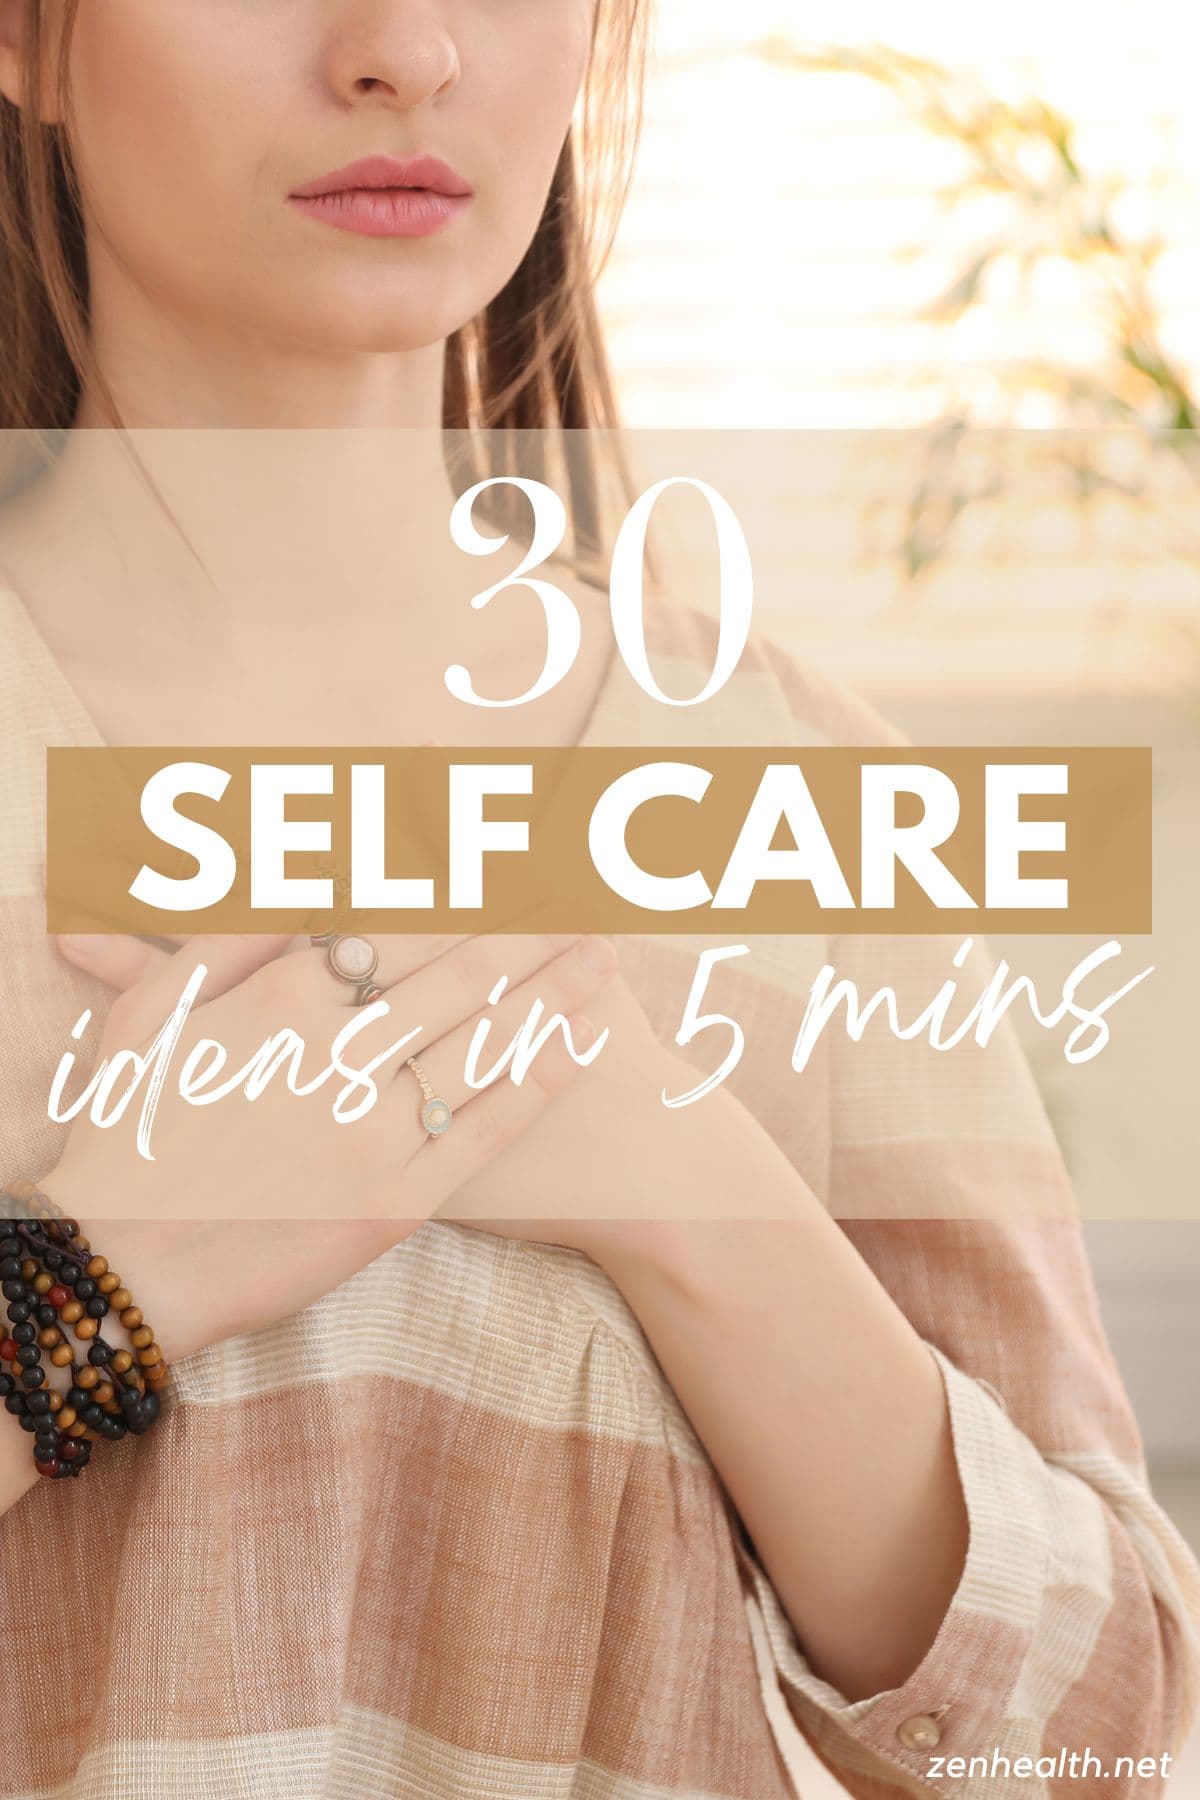 30 self care ideas in 5 mins text overlay on a photo of a woman with hands clasped on her chest breathing